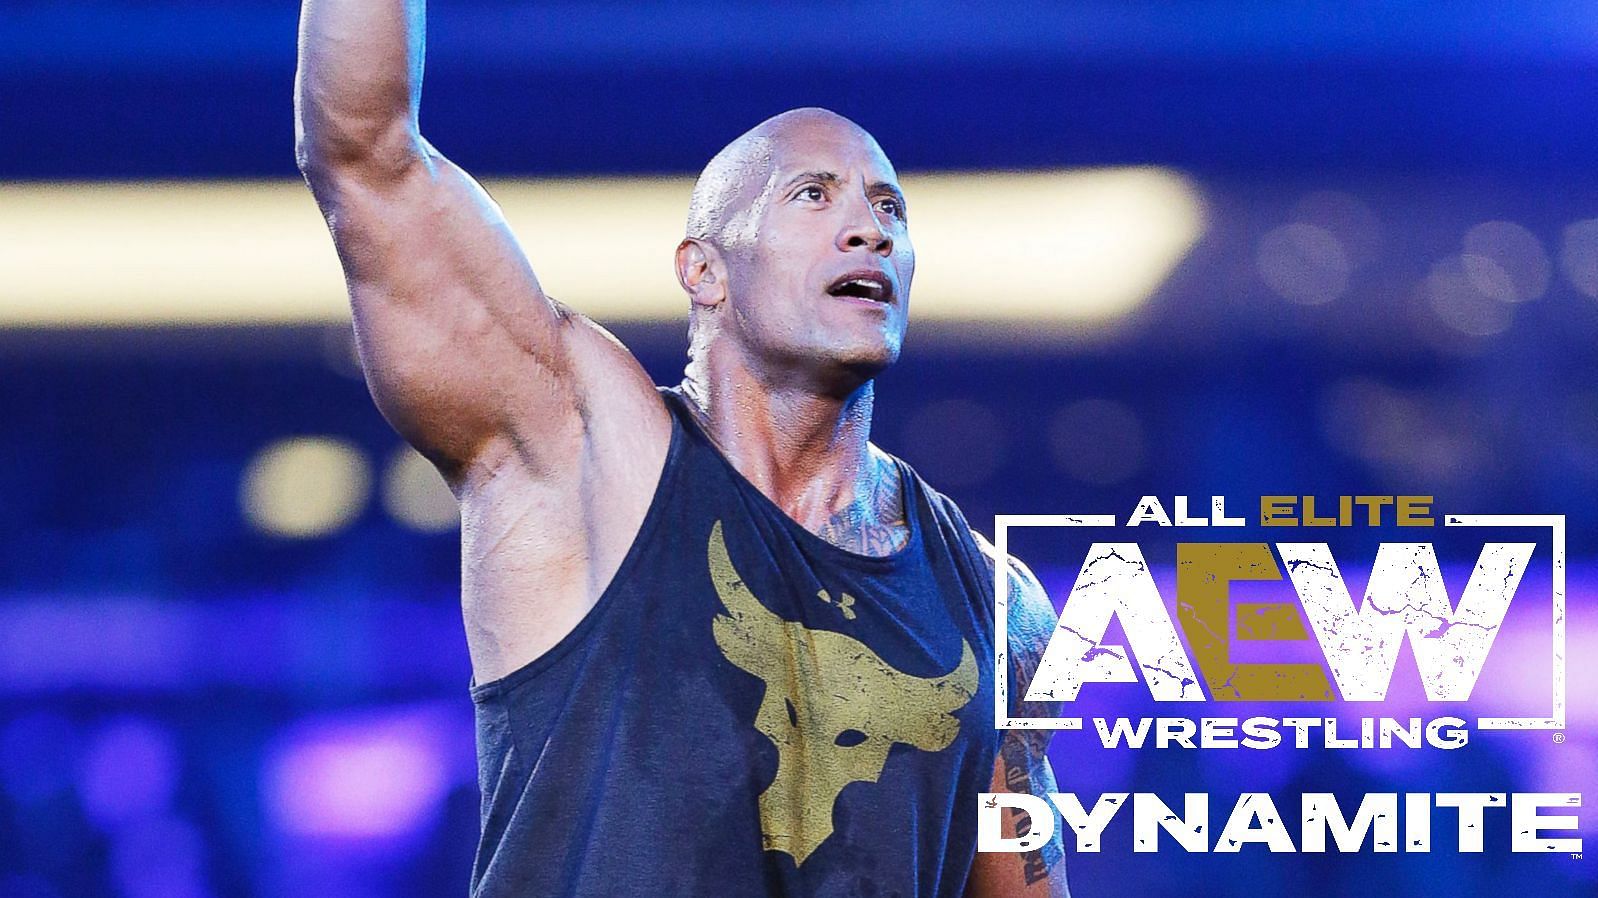 Dwayne Johnson is one of the most recognizable figures in wrestling and Hollywood today.